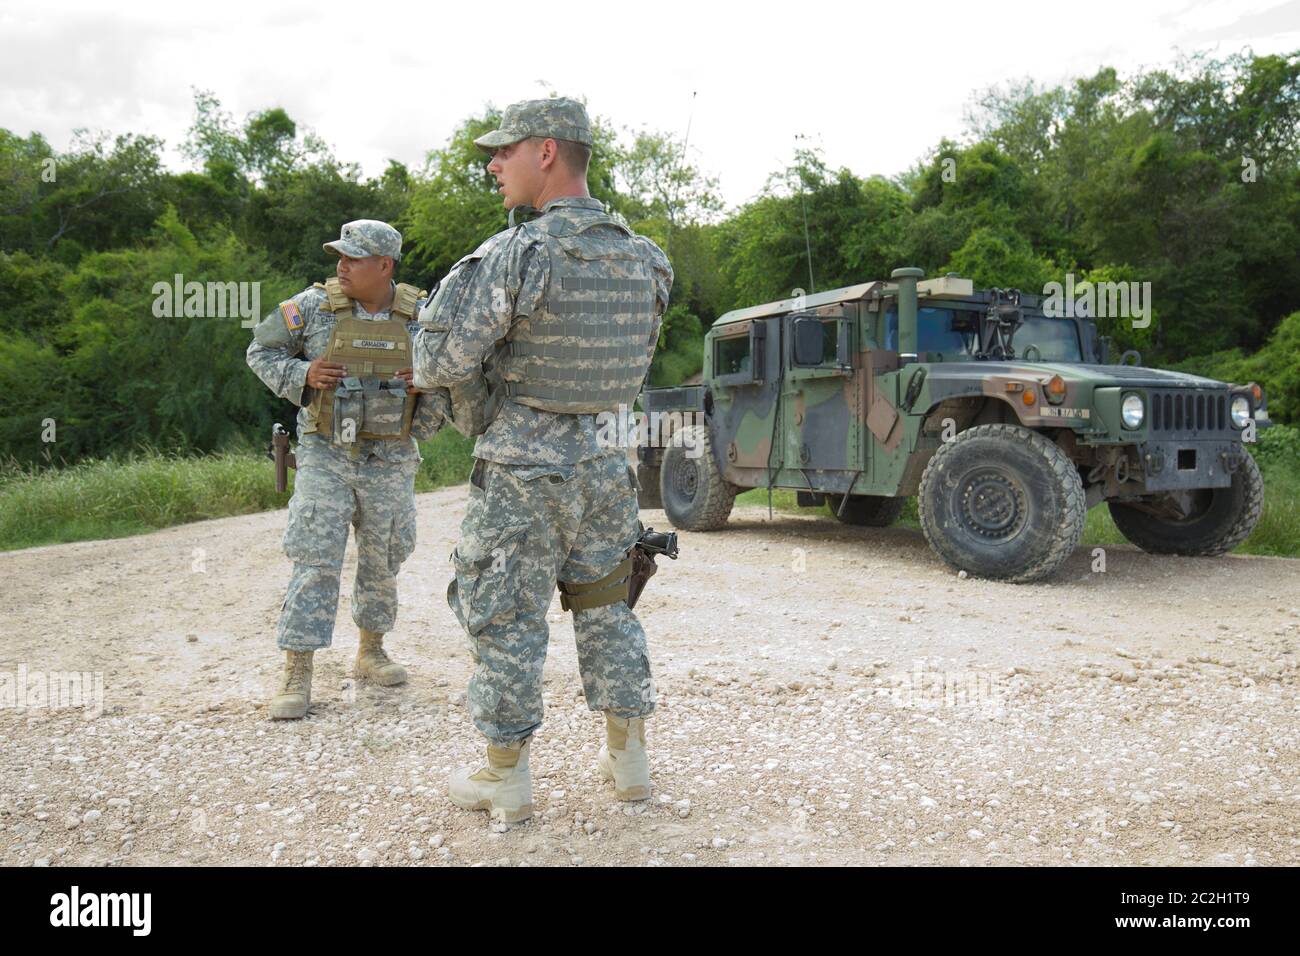 Texas Border Law Enforcement - National Guard troops do a shift change on the Rio Grande levee near Anzalduas Park in Granjeno, TX south of Mission in Hidalgo County.  Texas Governor Rick Perry ordered troops on the border to supplement federal law enforcement.   © Bob Daemmrich Stock Photo